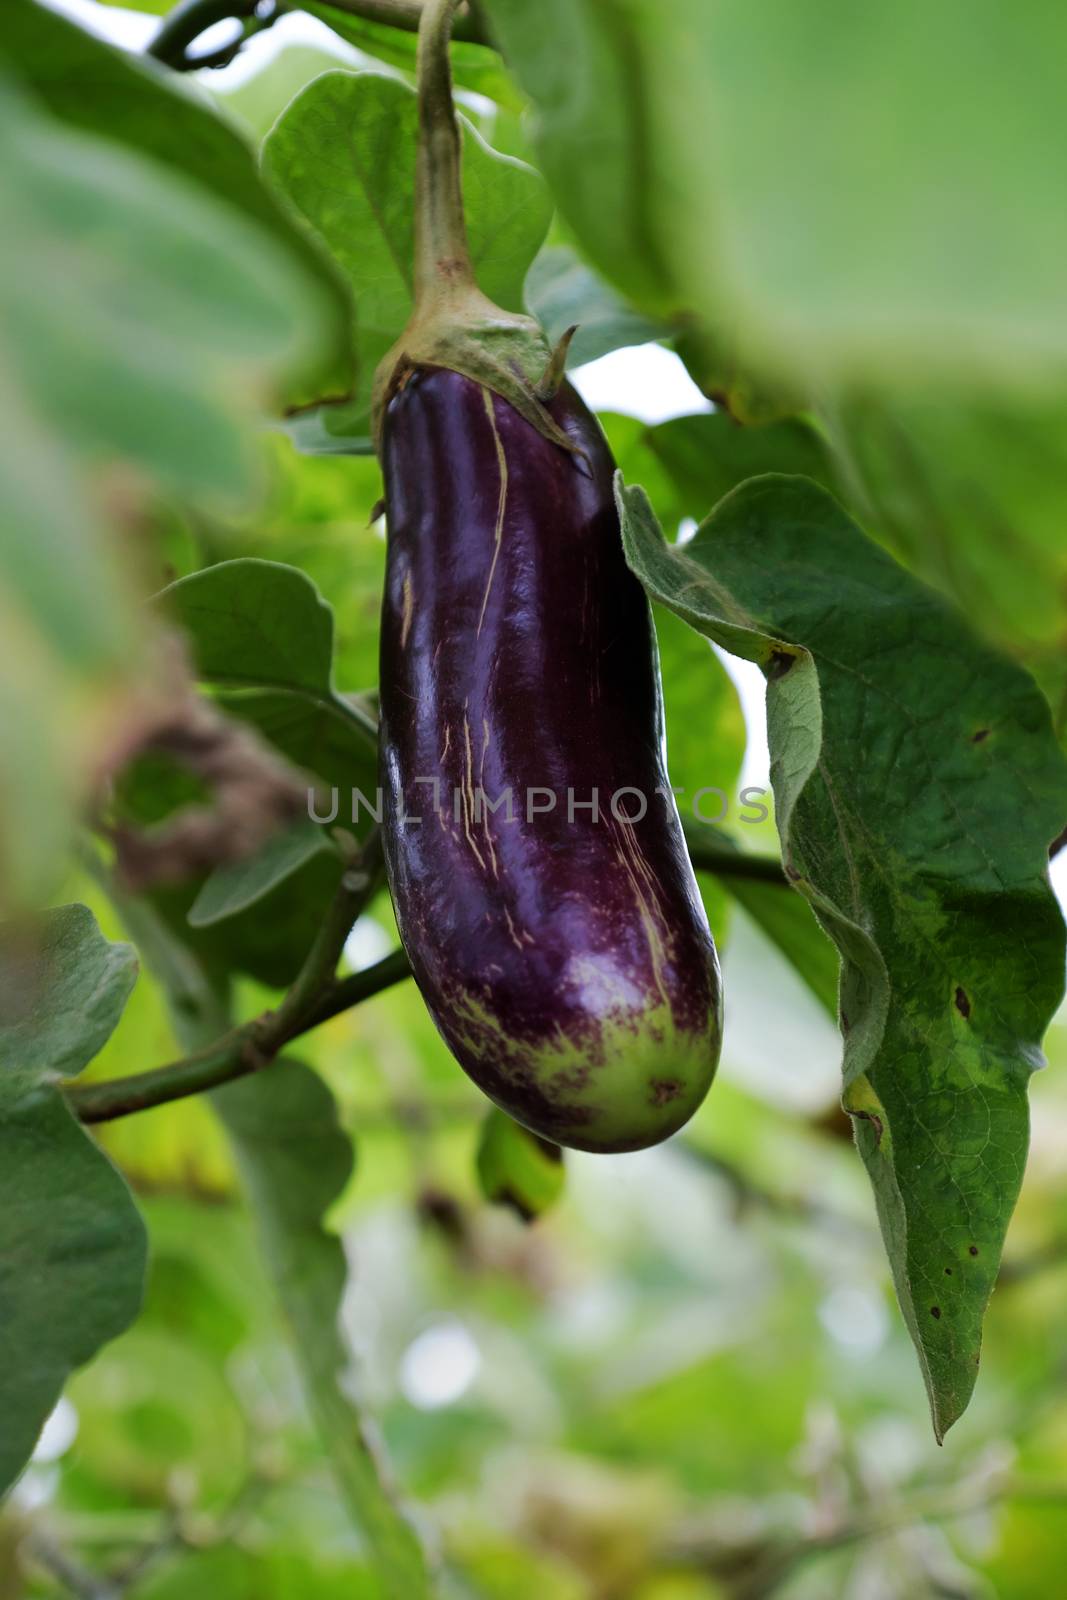 Eggplant plantation at Duc Trong, Viet Nam by xuanhuongho